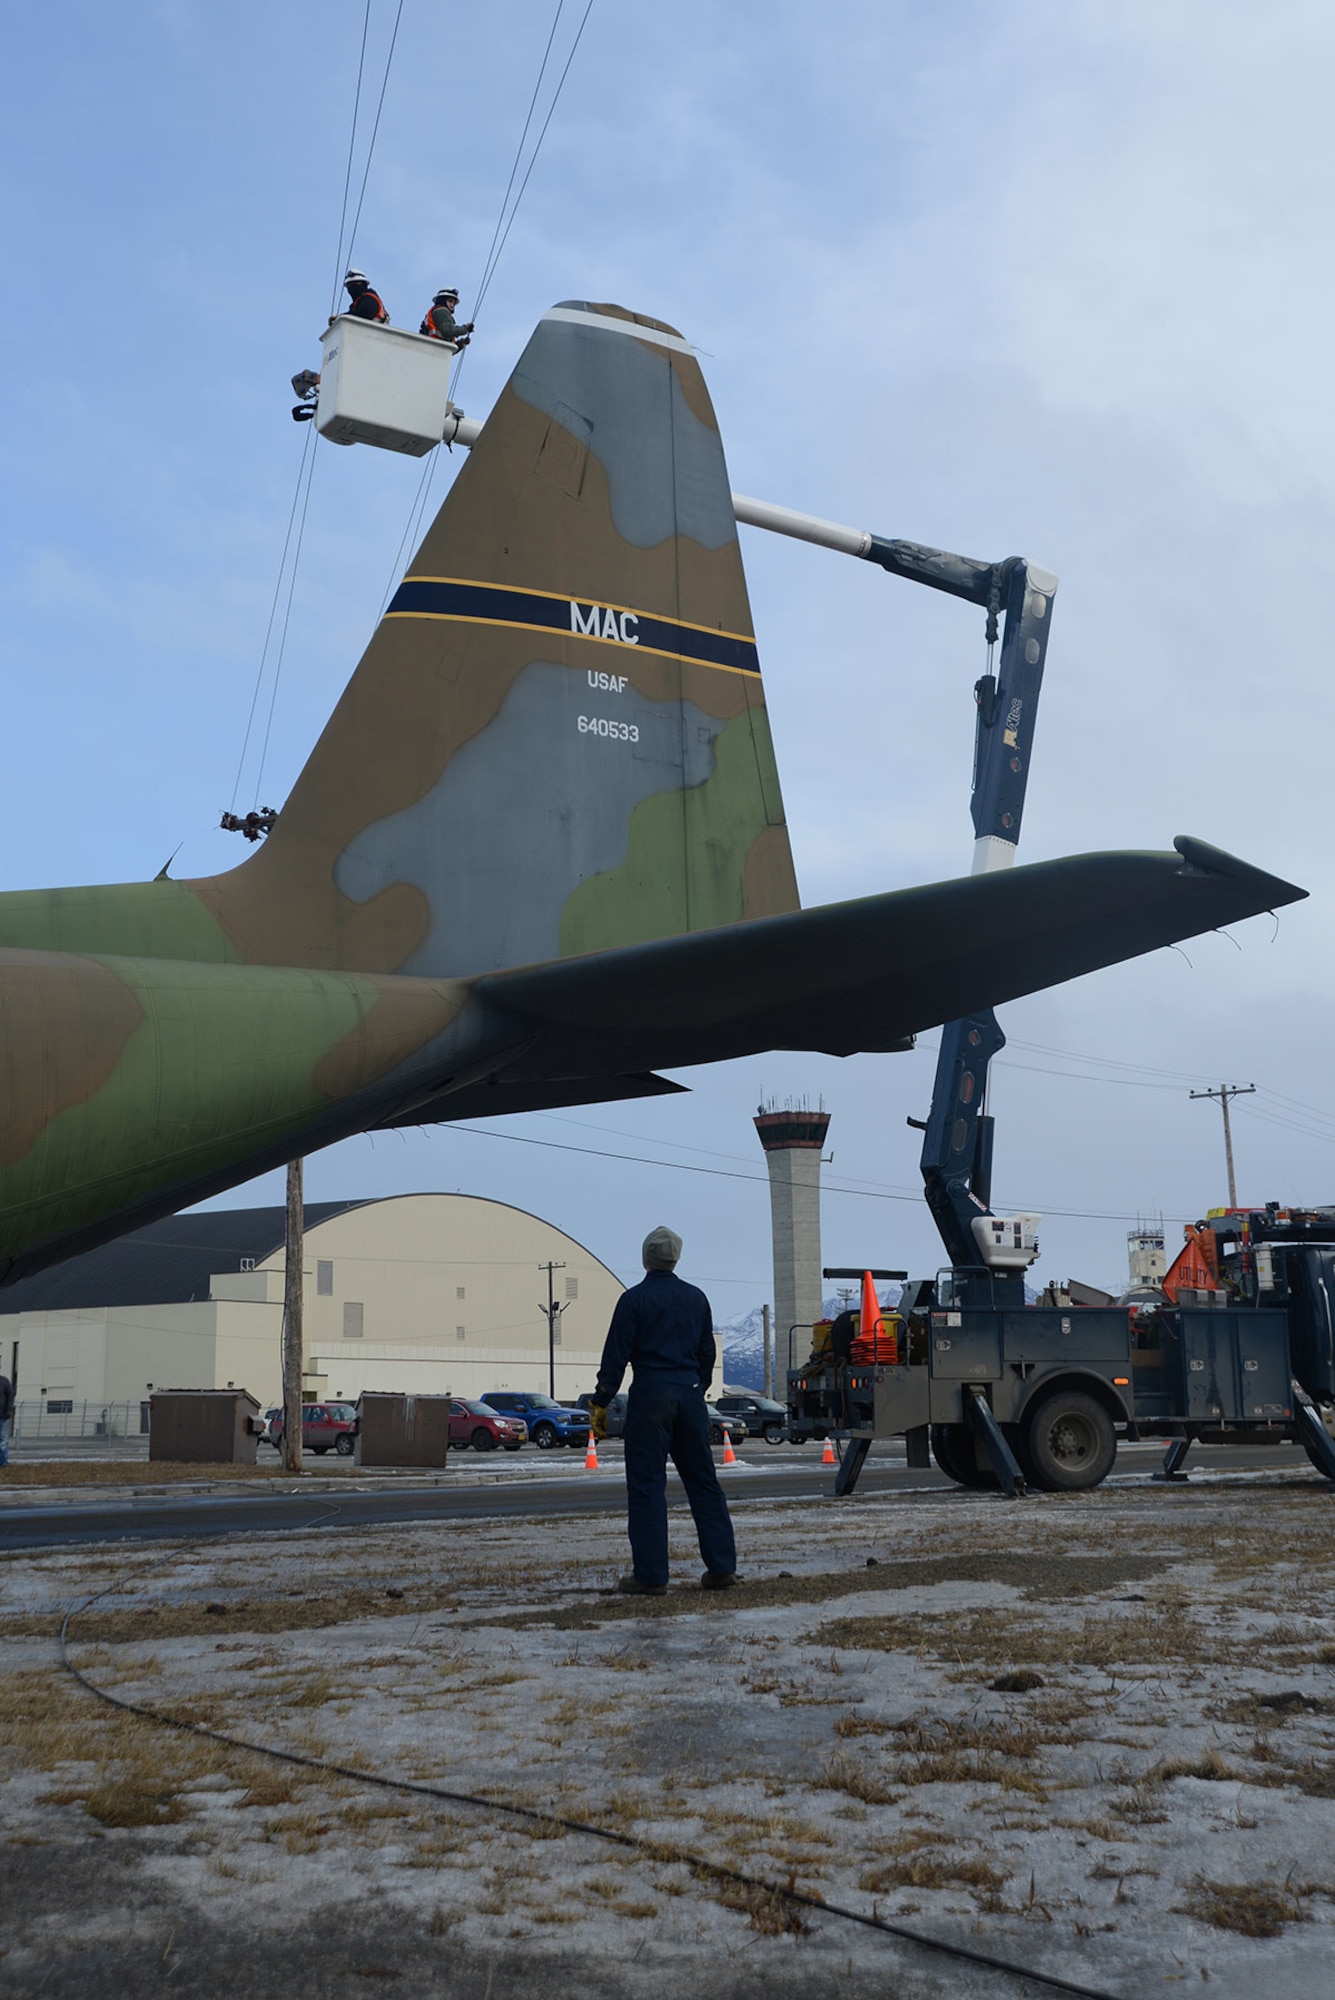 Contracted personnel with General Communications Inc. lift power lines out of the way during the static C-130 Hercules movement at Joint Base Elmendorf-Richardson Feb. 27, 2016. Due to the height of the aircraft some power lines were removed and others were lifted for minimal damage. (U.S. Air Force photo by Airman 1st Class Christopher R. Morales)